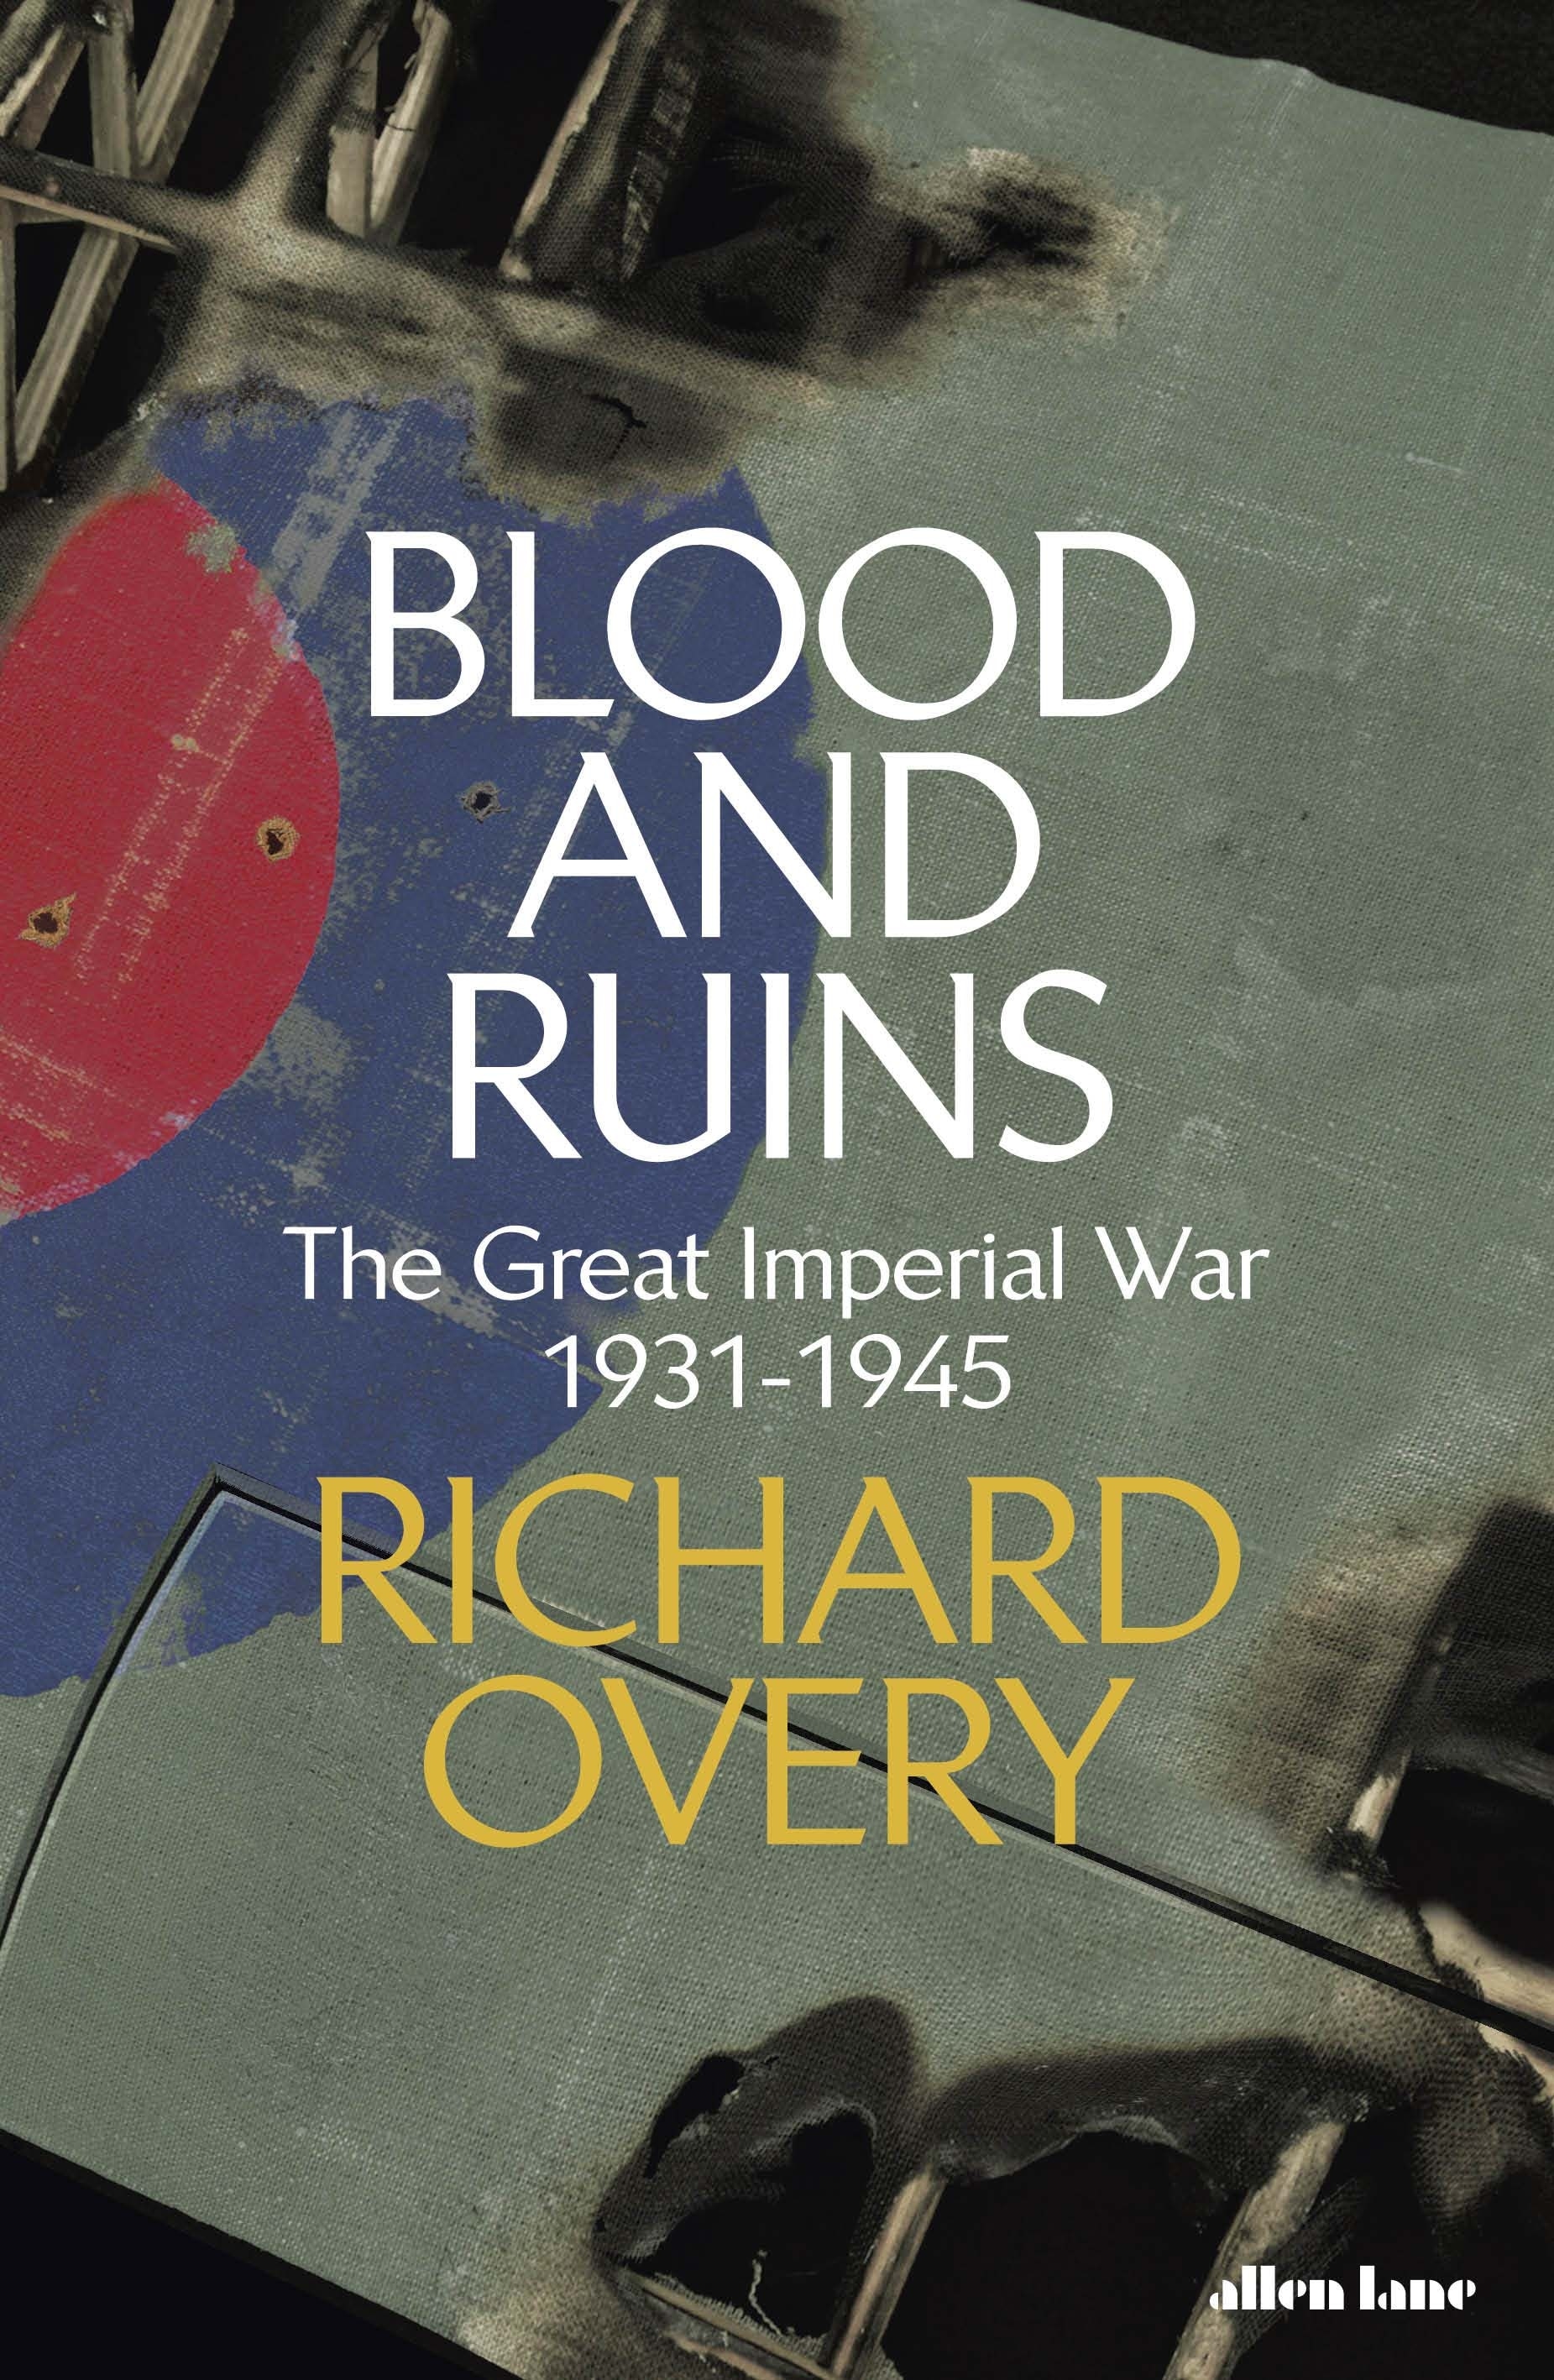 Book “Blood and Ruins” by Richard Overy — August 26, 2021